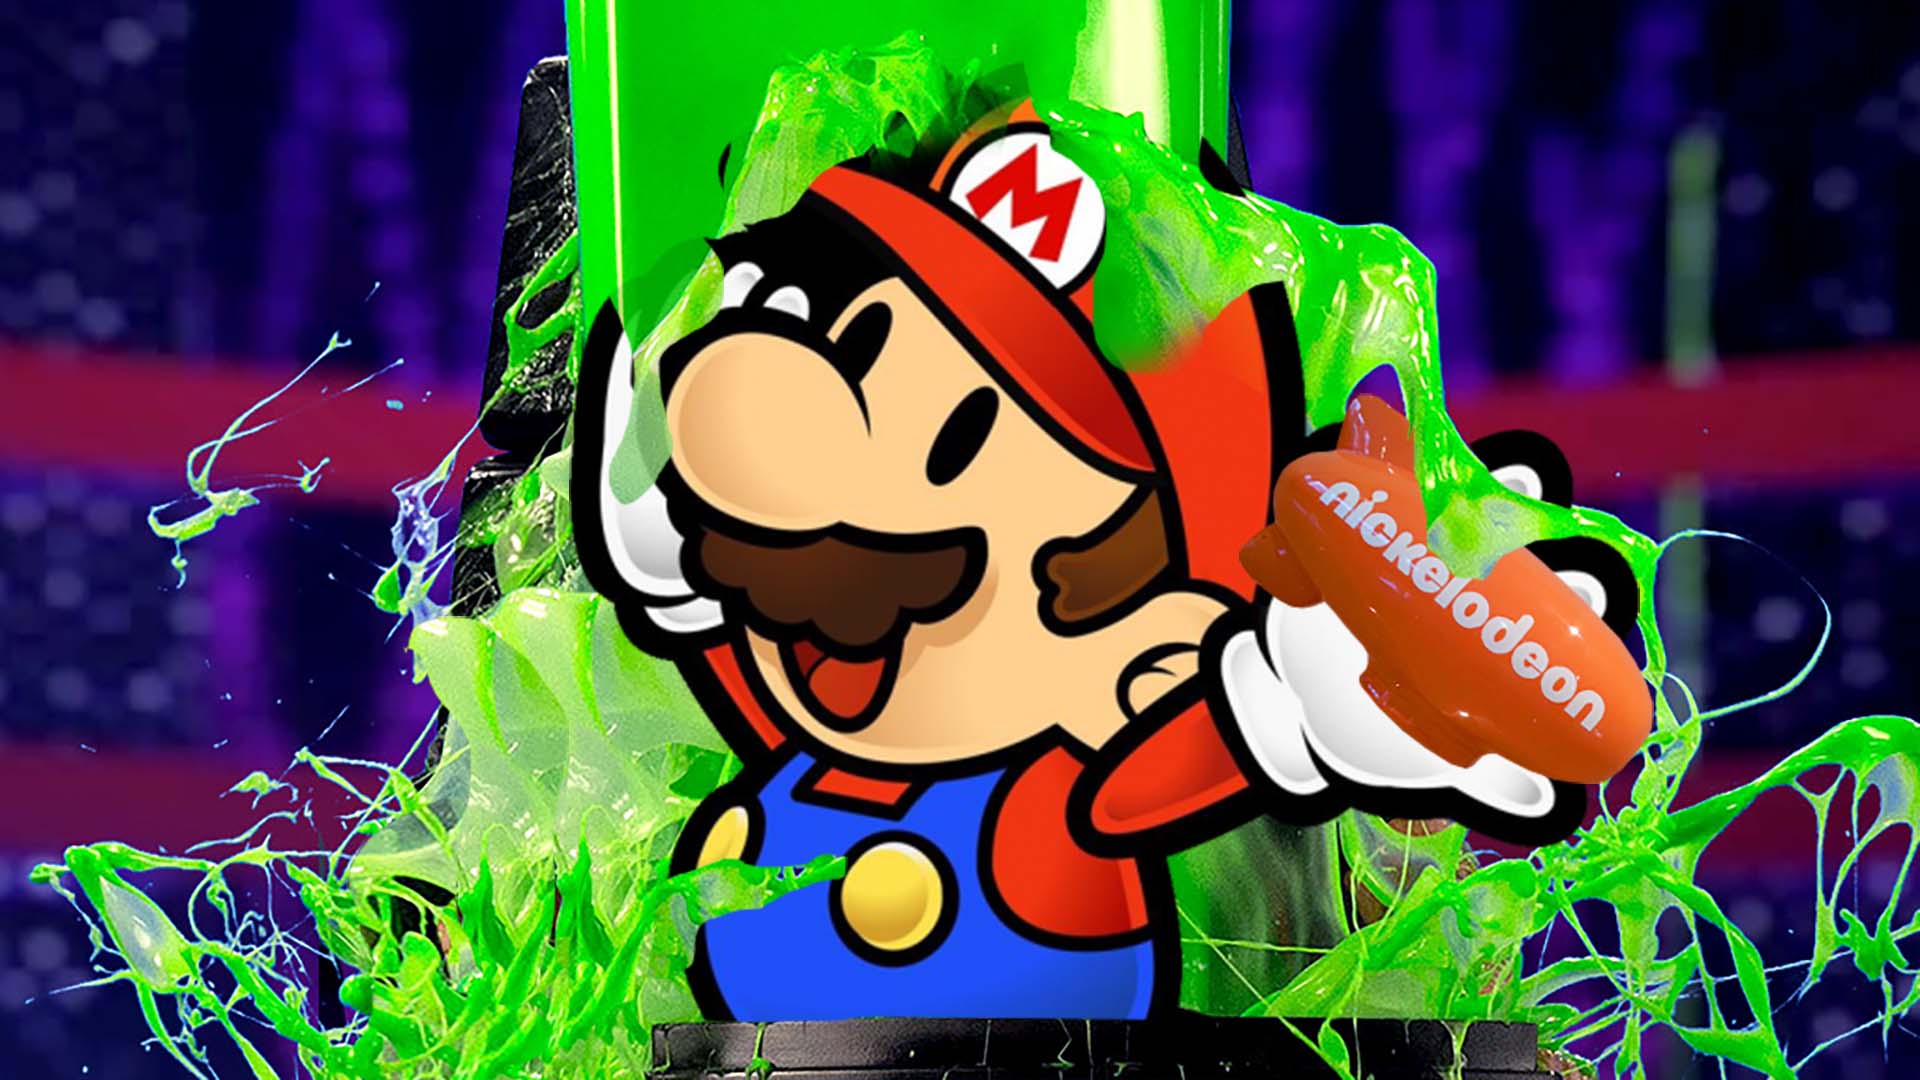 Paper Mario: Color Splash and Pokémon Moon nominated for a Kids' Choice Award